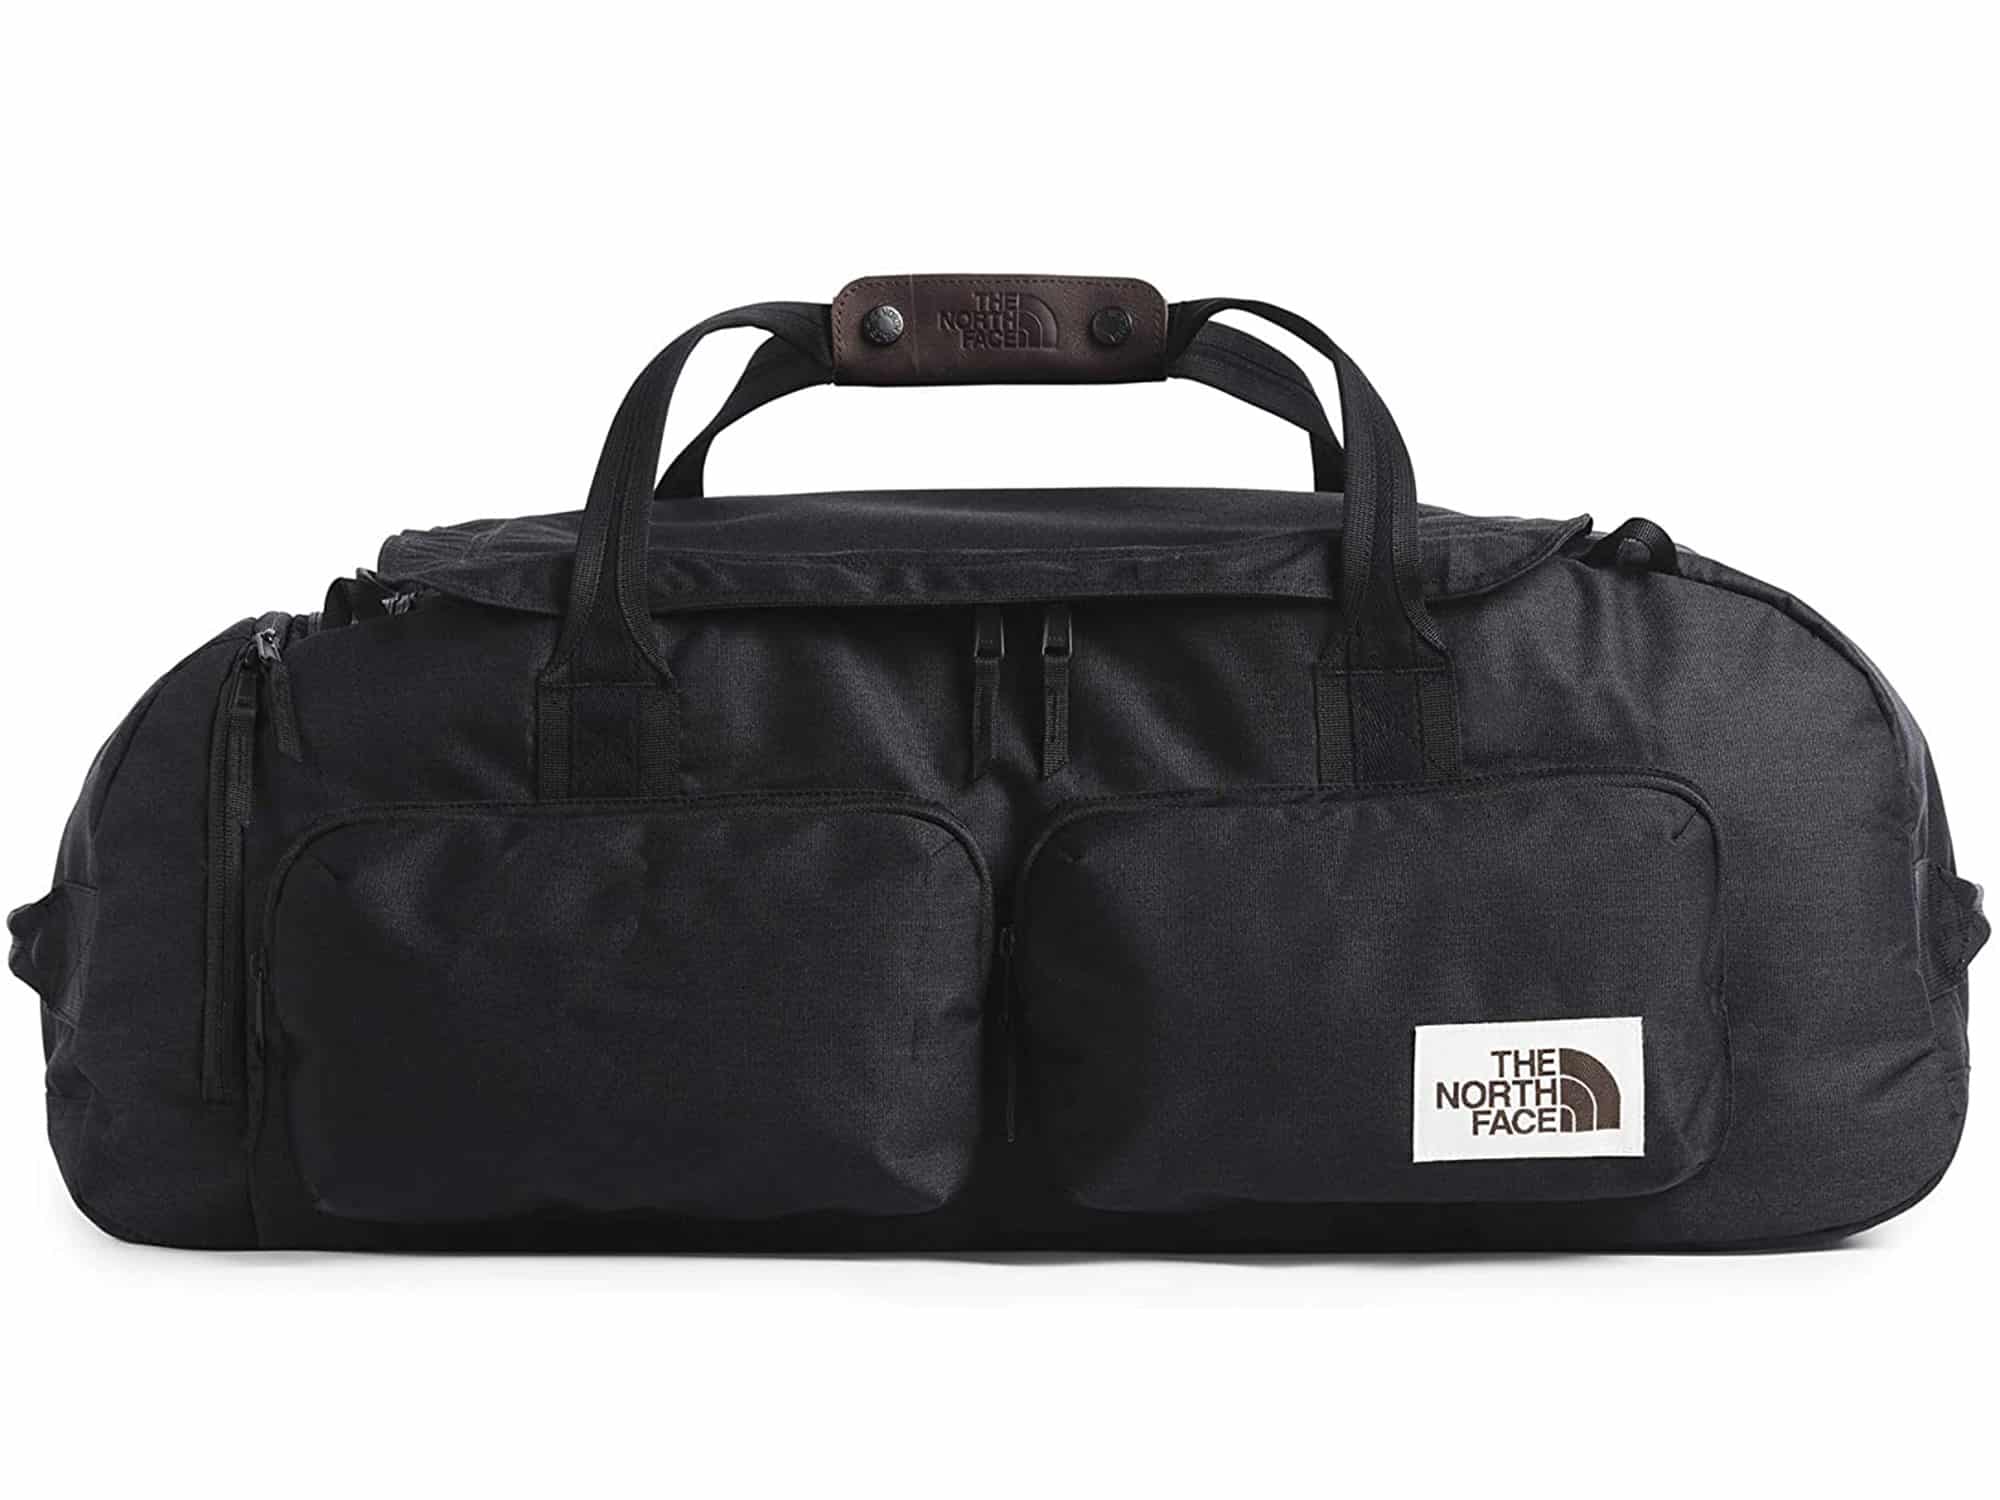 North face duffle